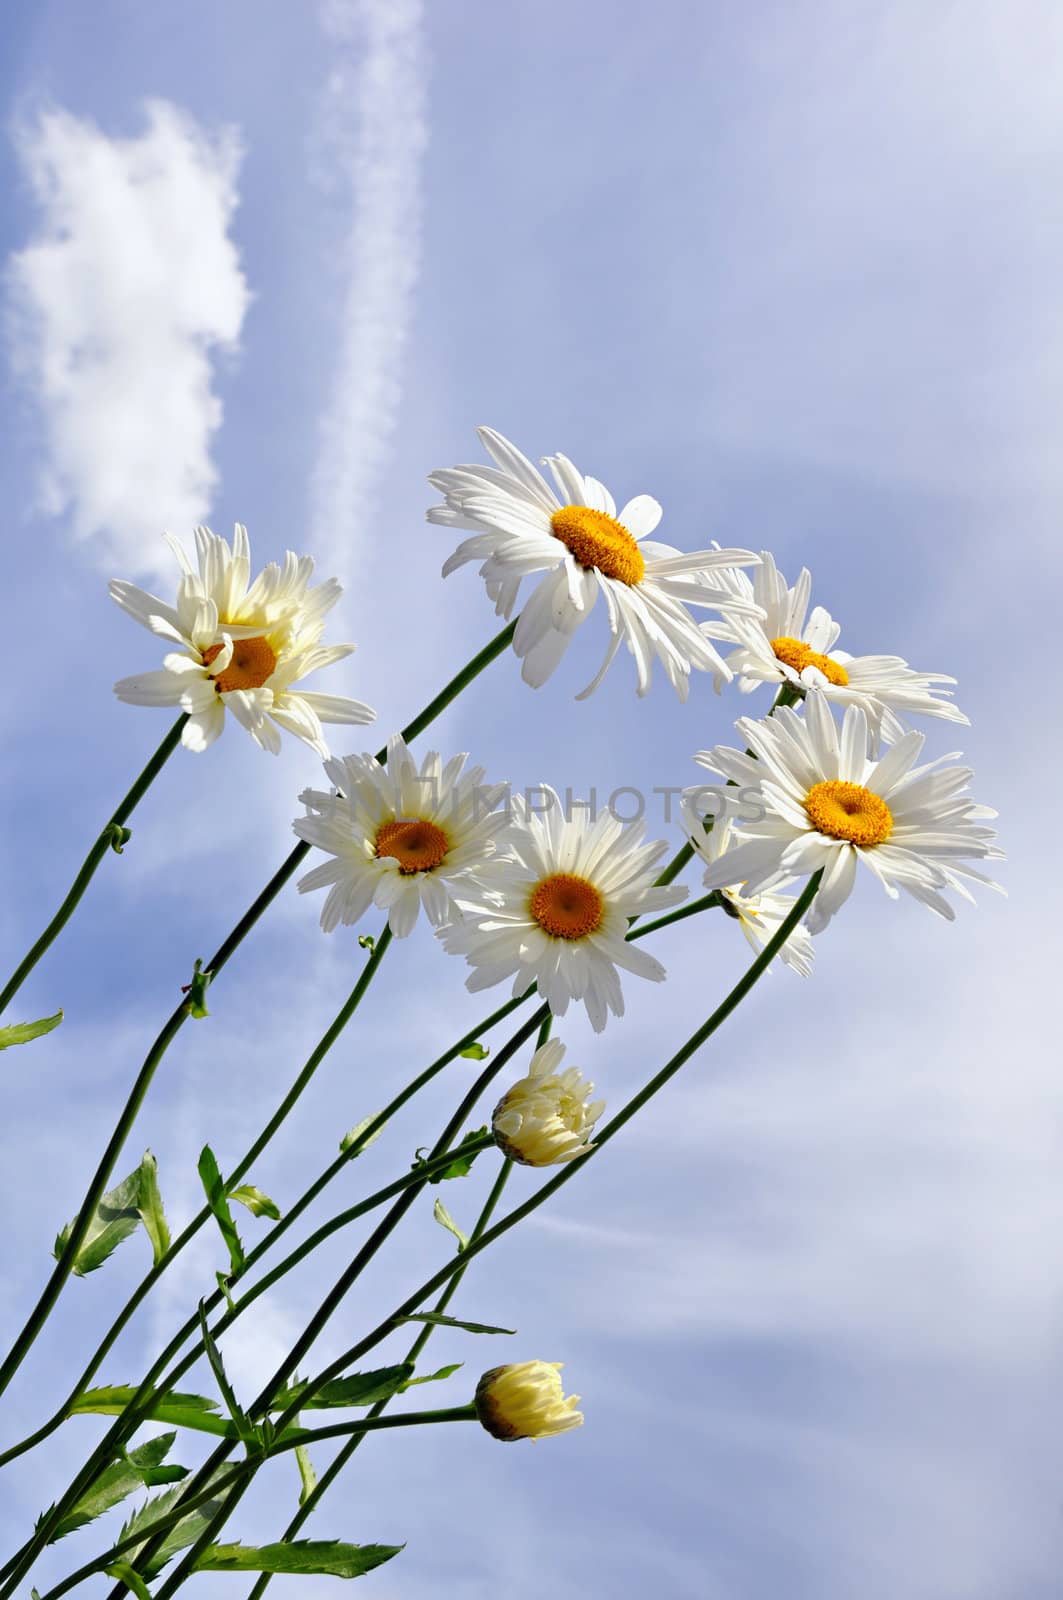 Garden daisies on a background of blue sky with clouds